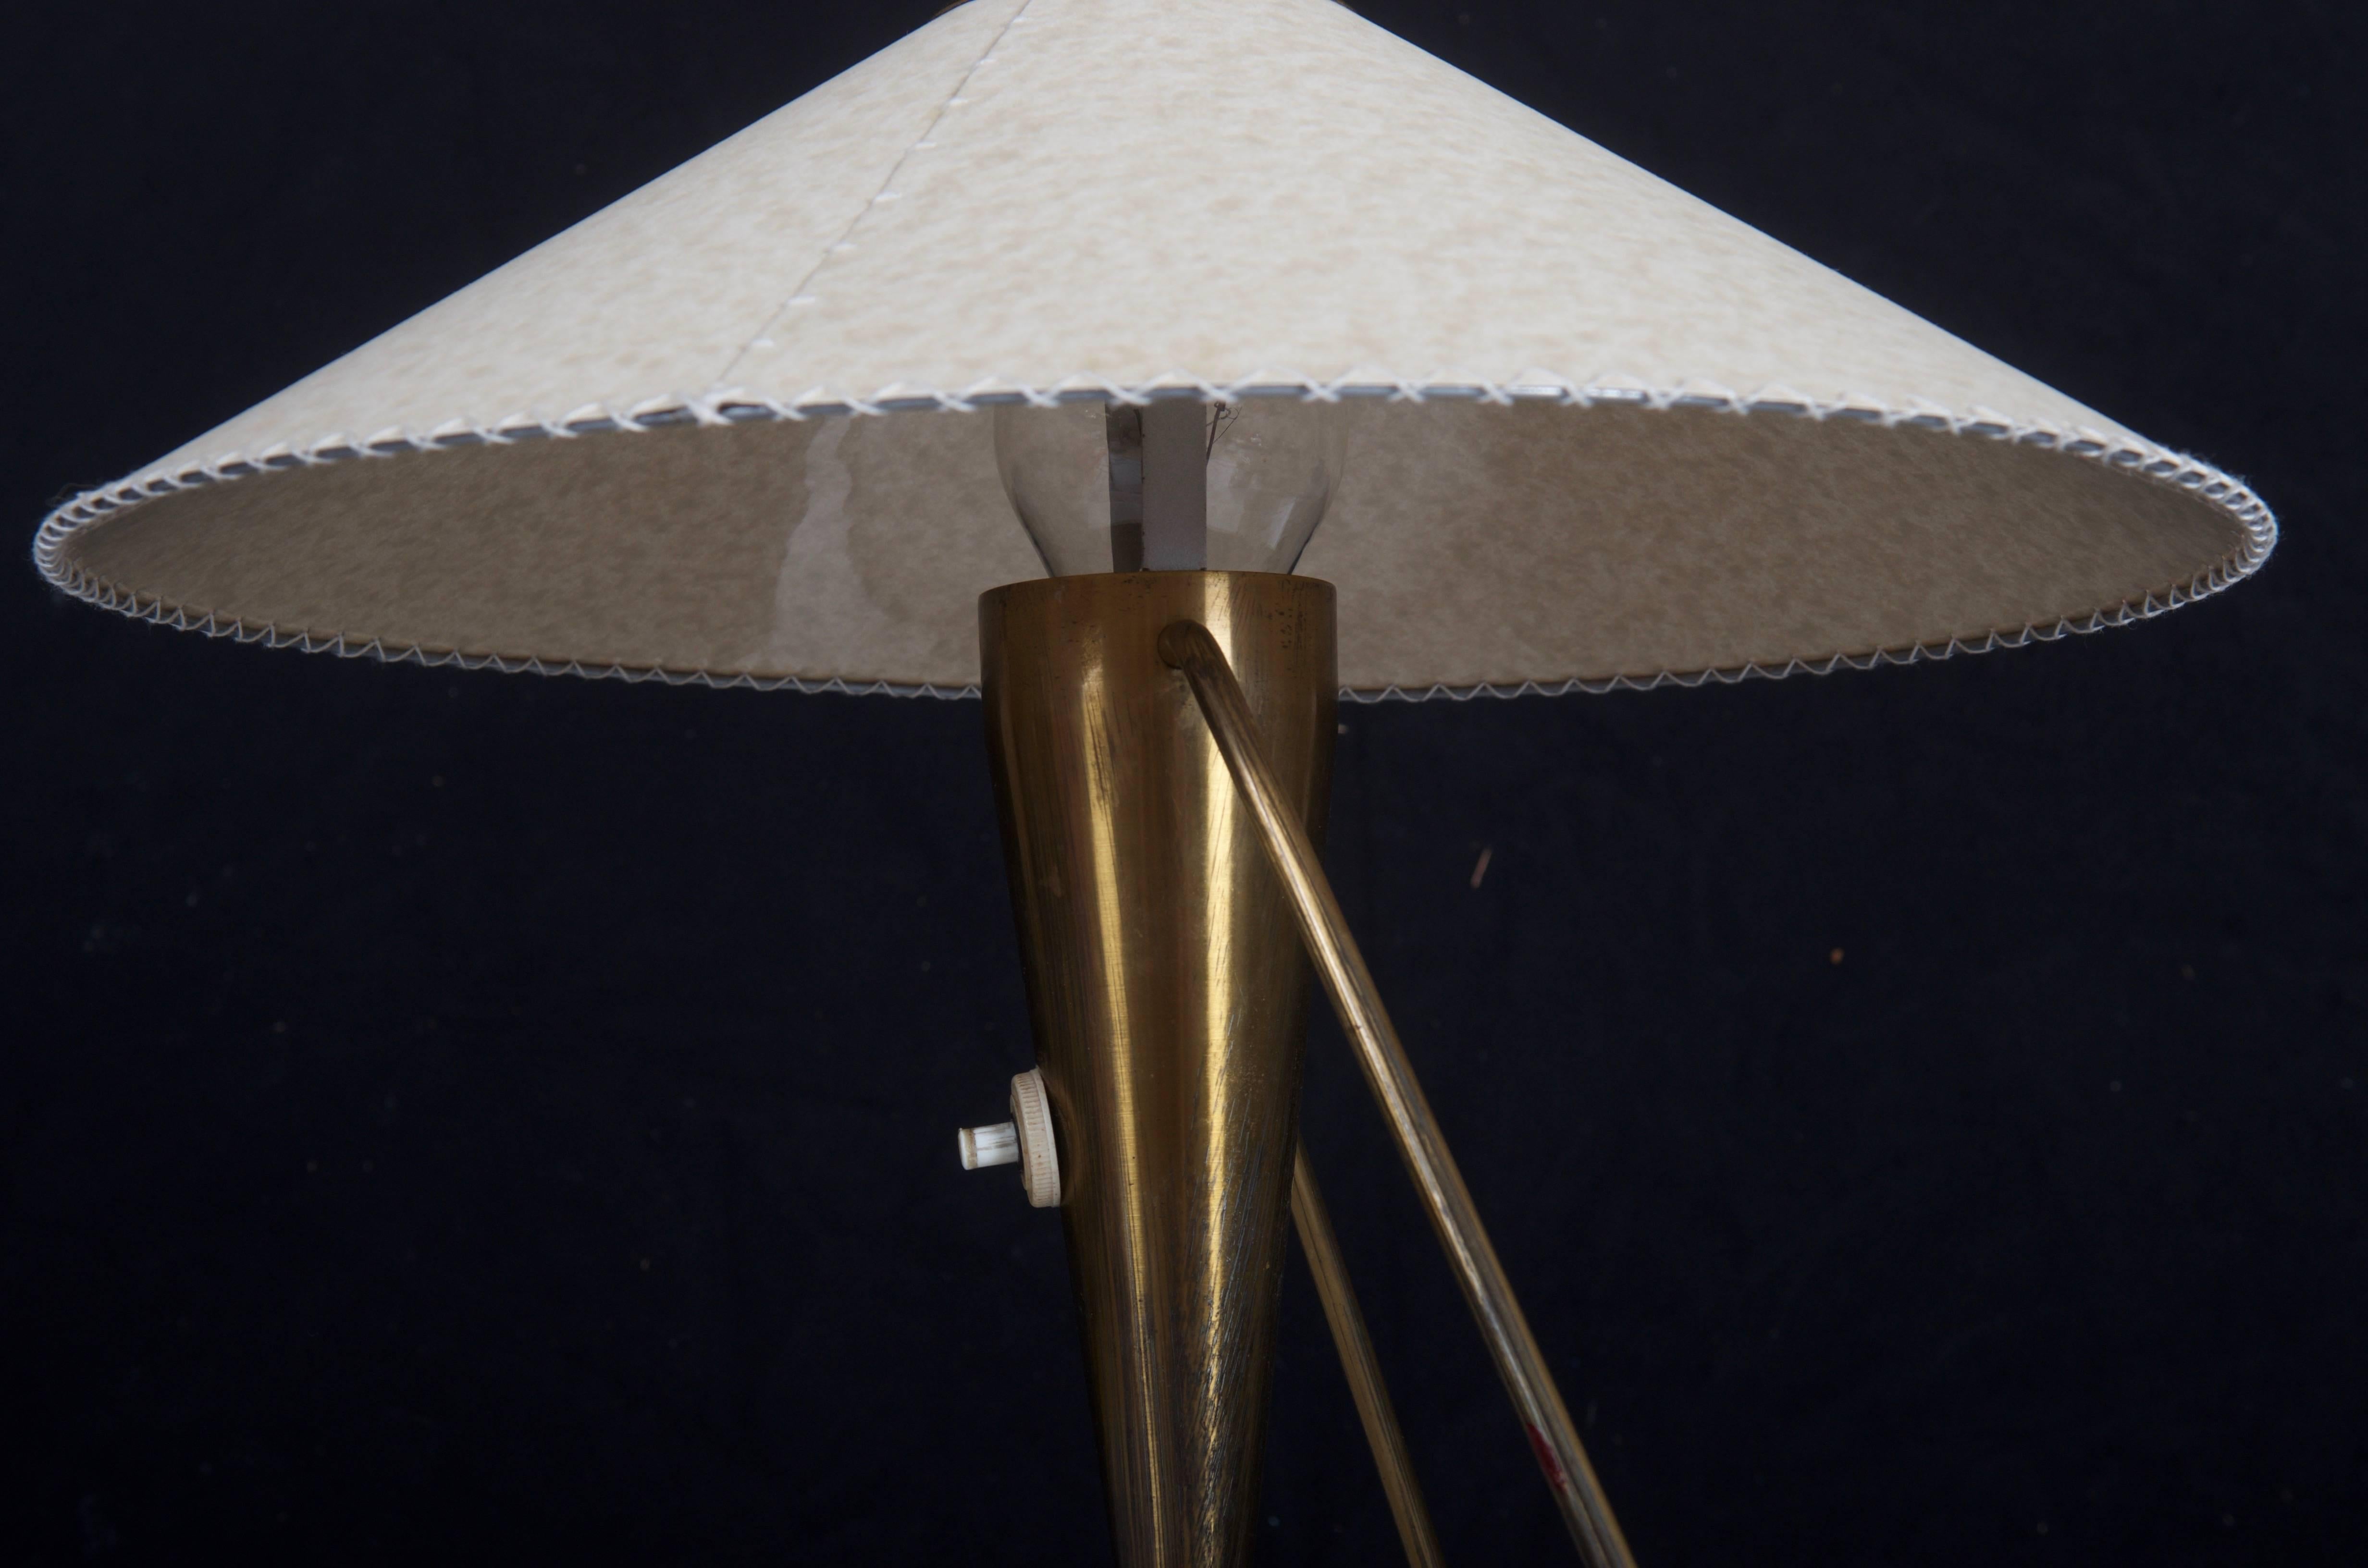 Czech Modernist Desk Lamp by Helena Frantova for Okolo In Excellent Condition For Sale In Vienna, AT